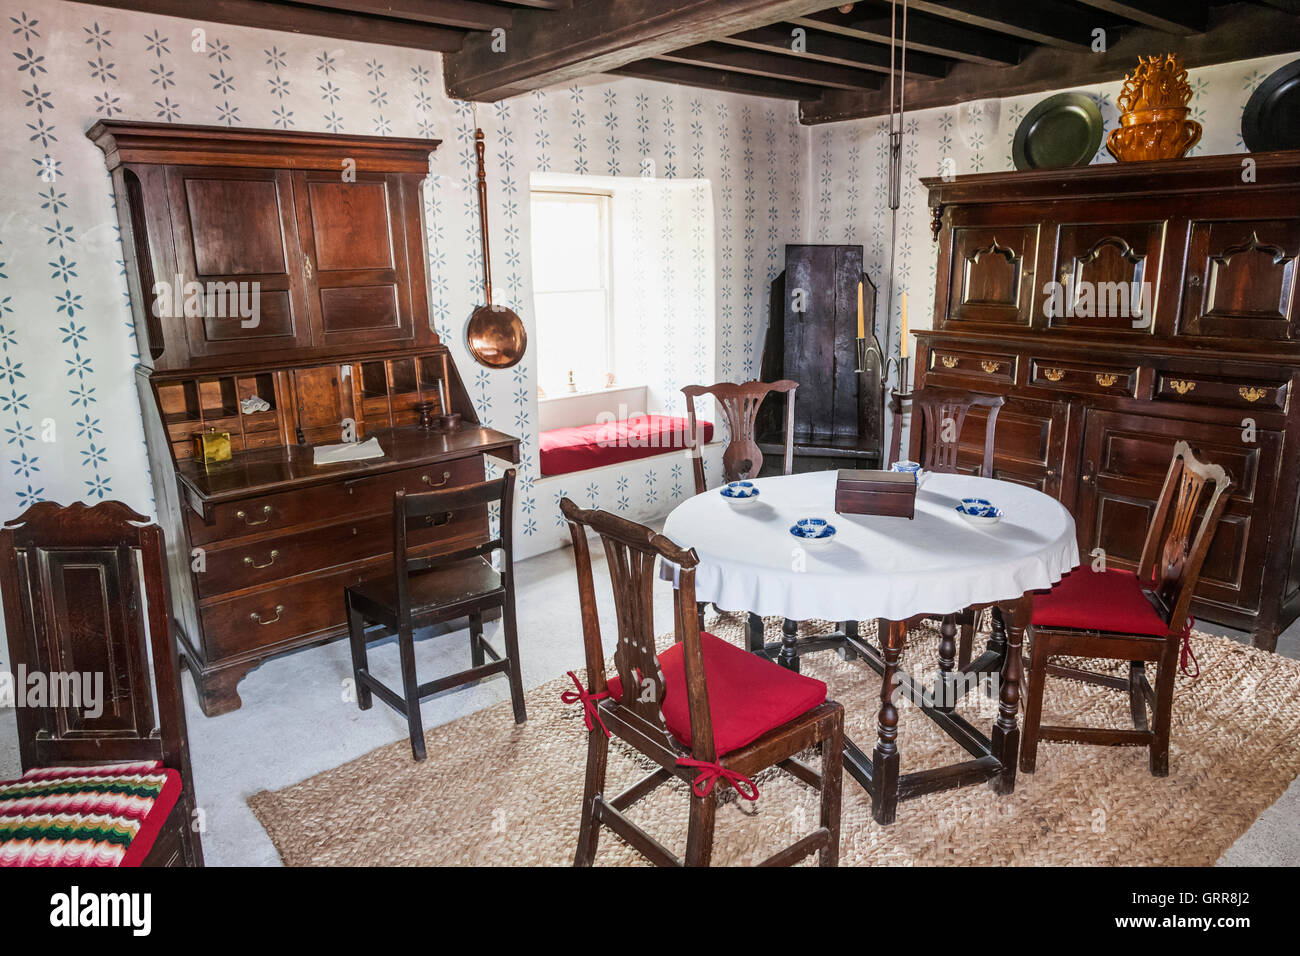 Wales, Cardiff, St Fagan's, Museum of Welsh Life, Interior display of 19th century Farmhouse Dining Room Stock Photo